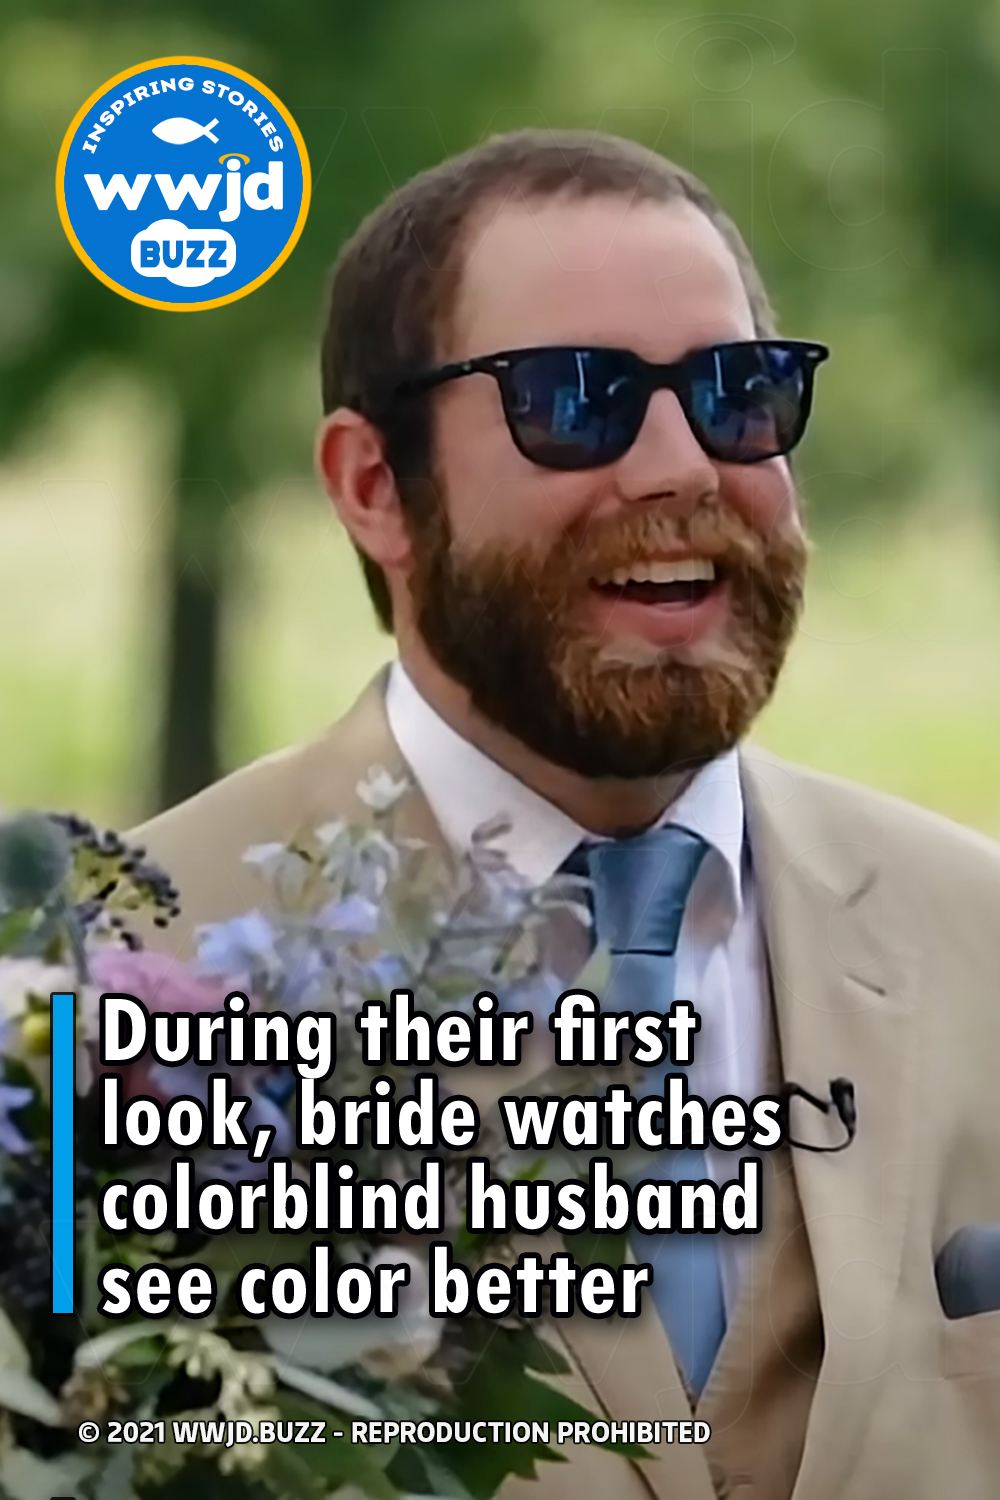 During their first look, bride watches colorblind husband see color better